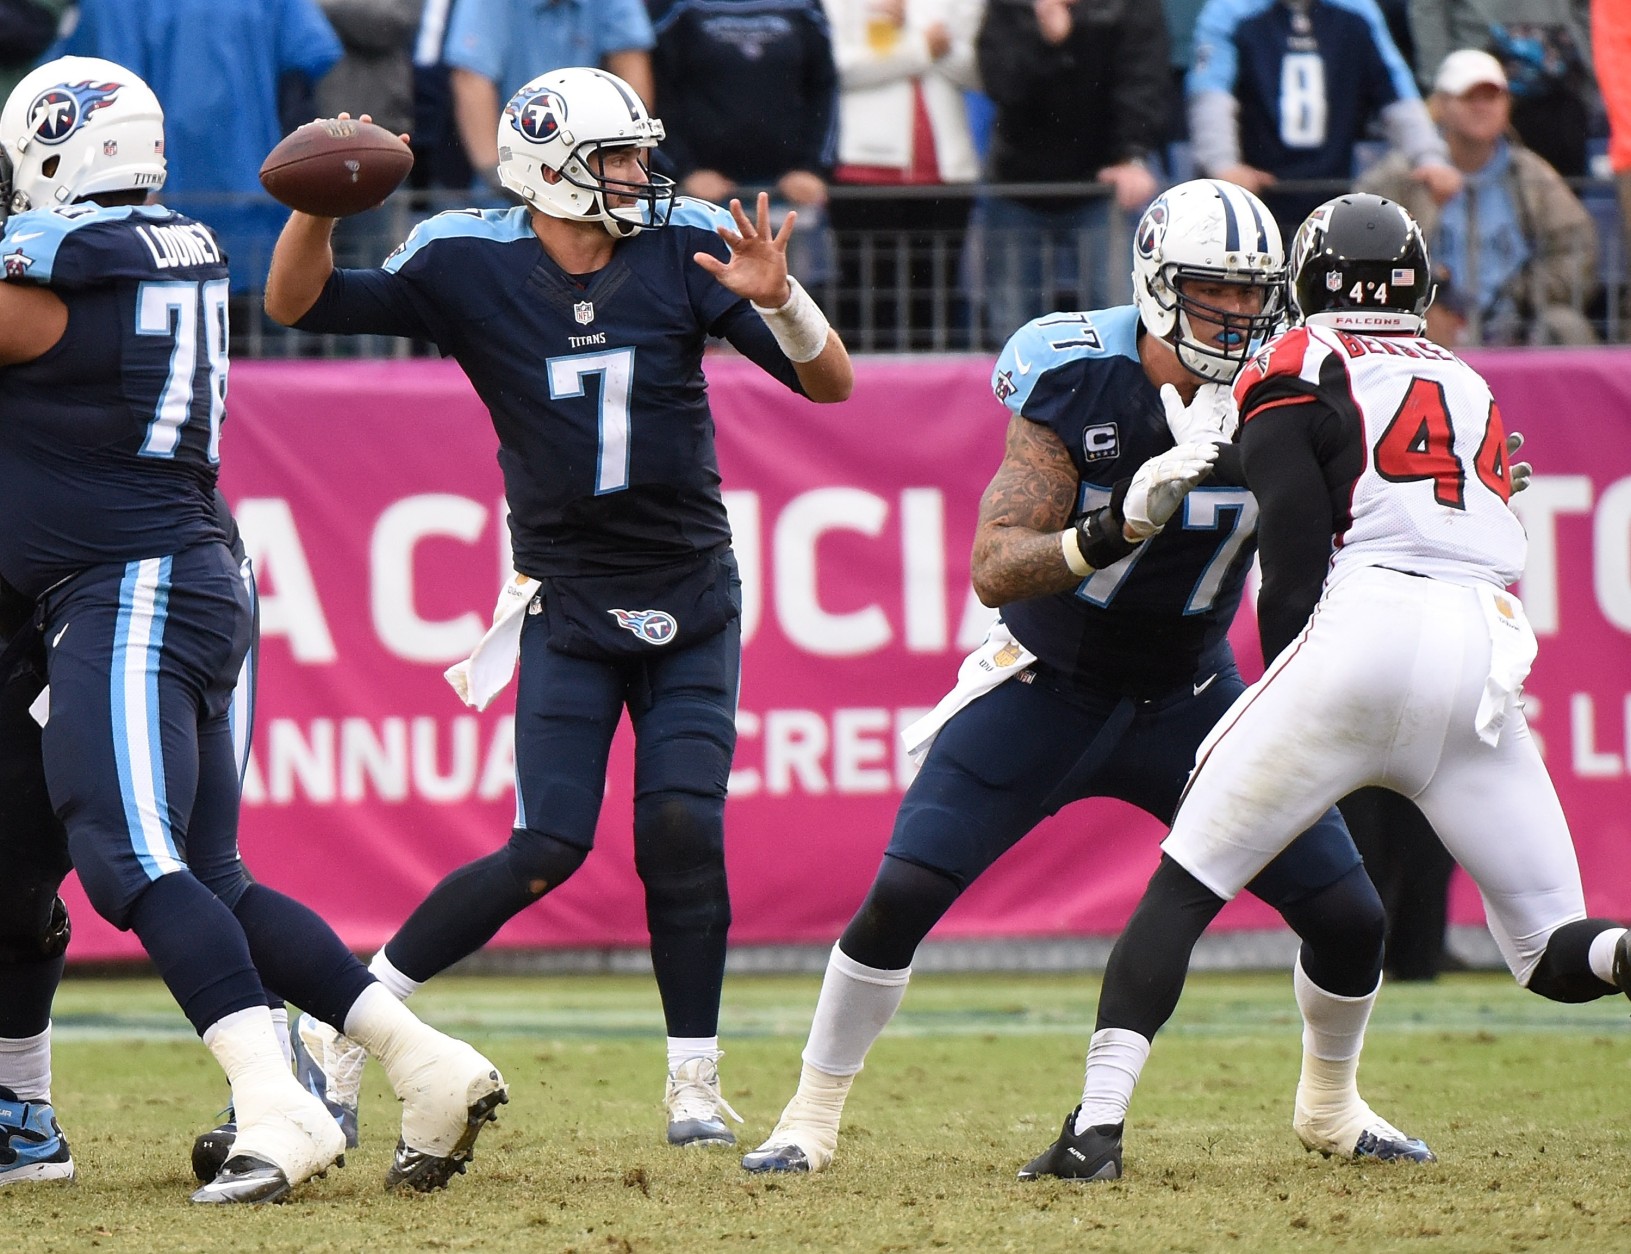 NASHVILLE, TN - OCTOBER 25:  Quarterback Zach Mettenberger #7 of the Tennessee Titans drops back to throw a pass against the Atlanta Falcons during the second half at Nissan Stadium on October 25, 2015 in Nashville, Tennessee.  (Photo by Frederick Breedon/Getty Images)